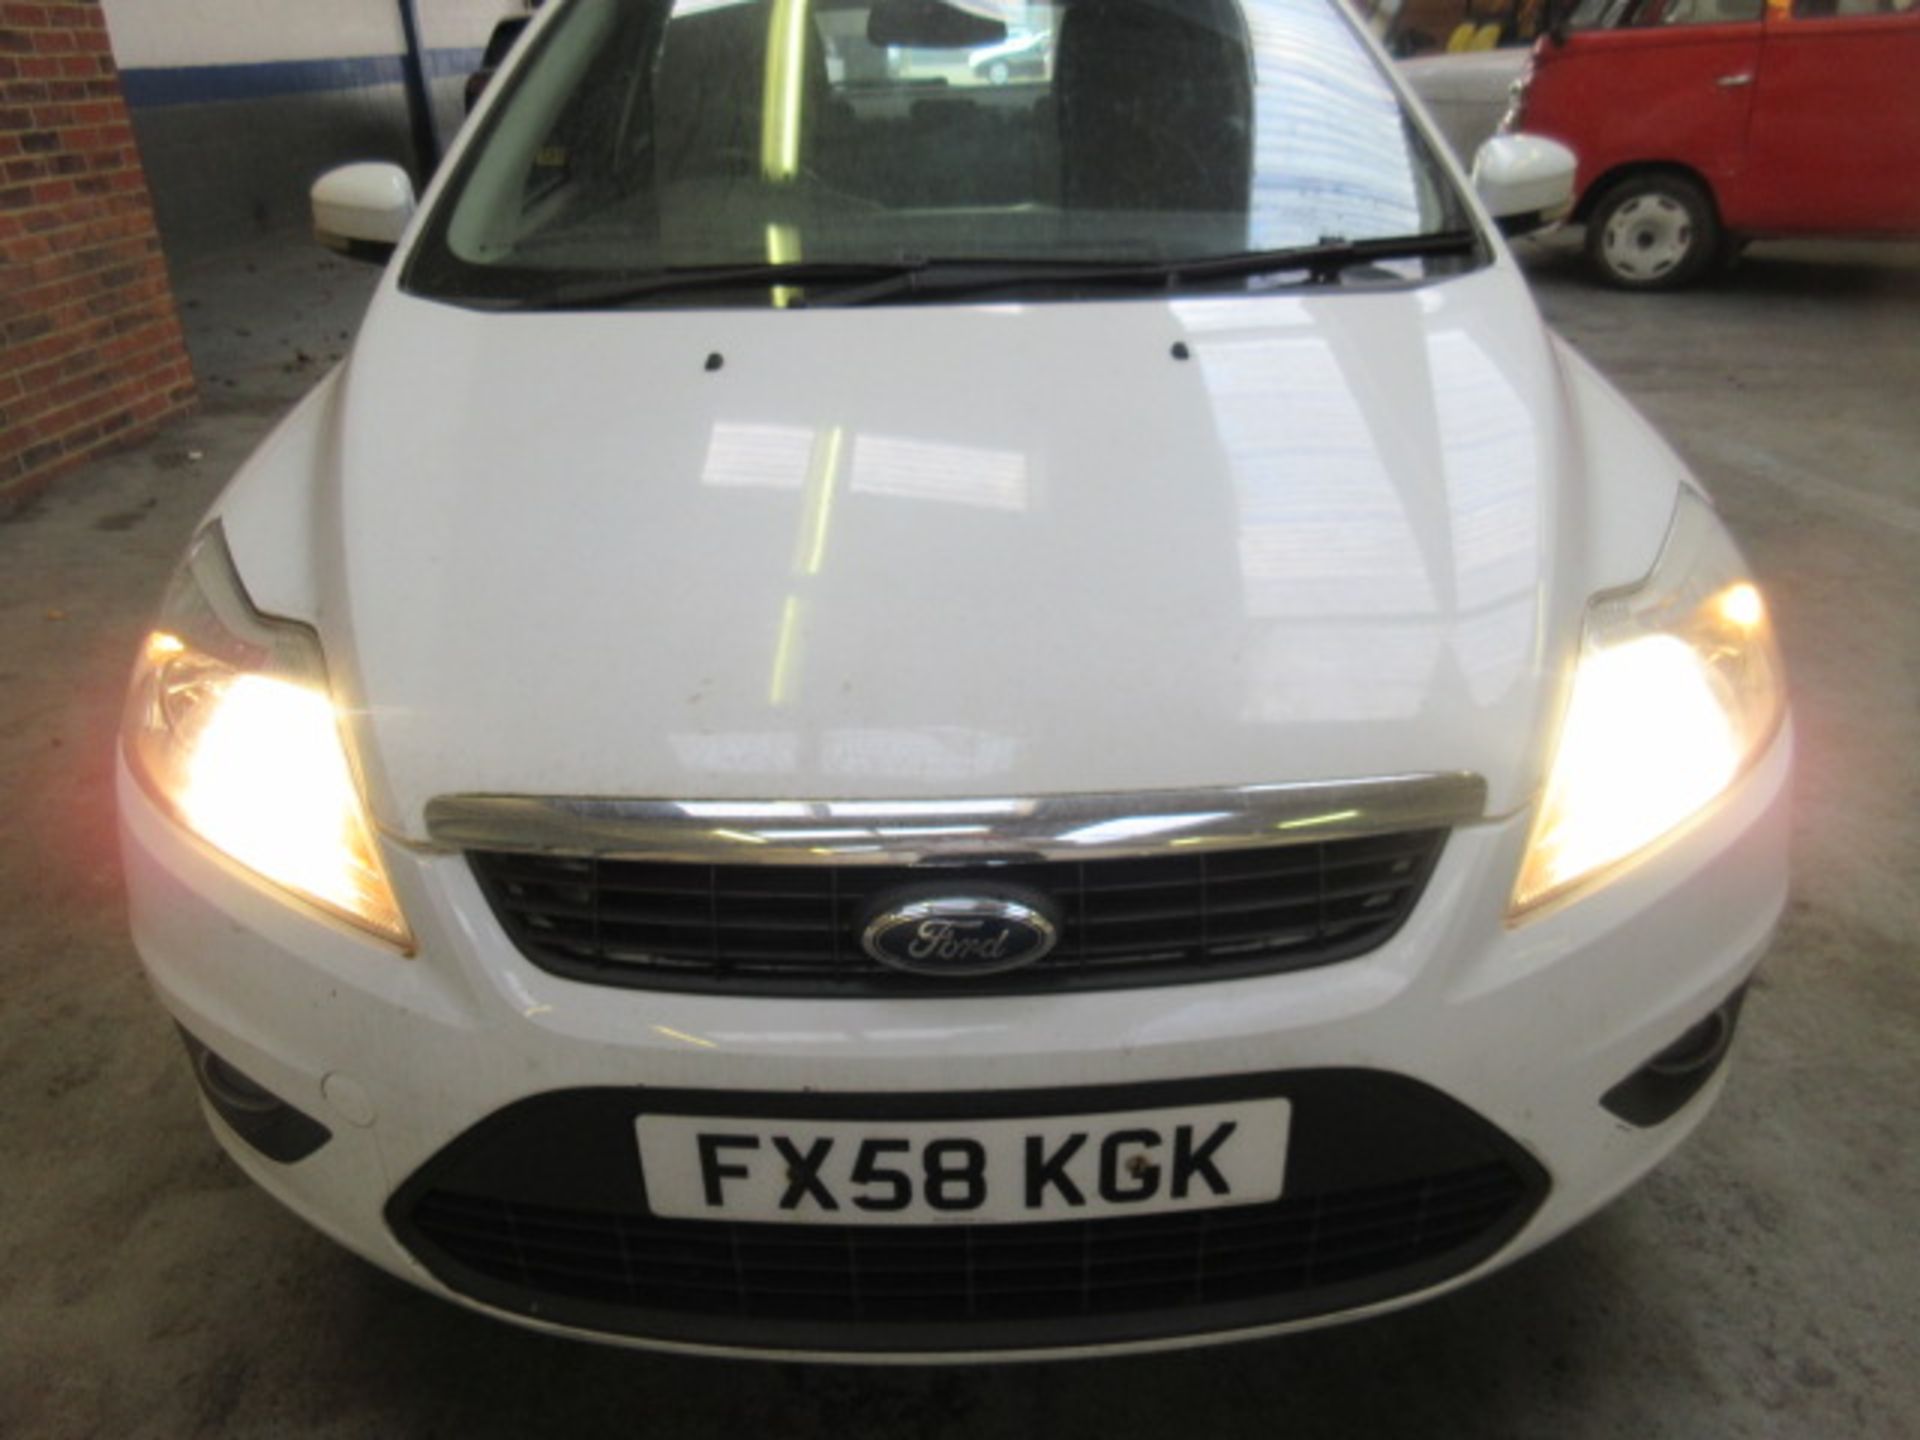 58 08 Ford Focus Style TD 115 - Image 2 of 11